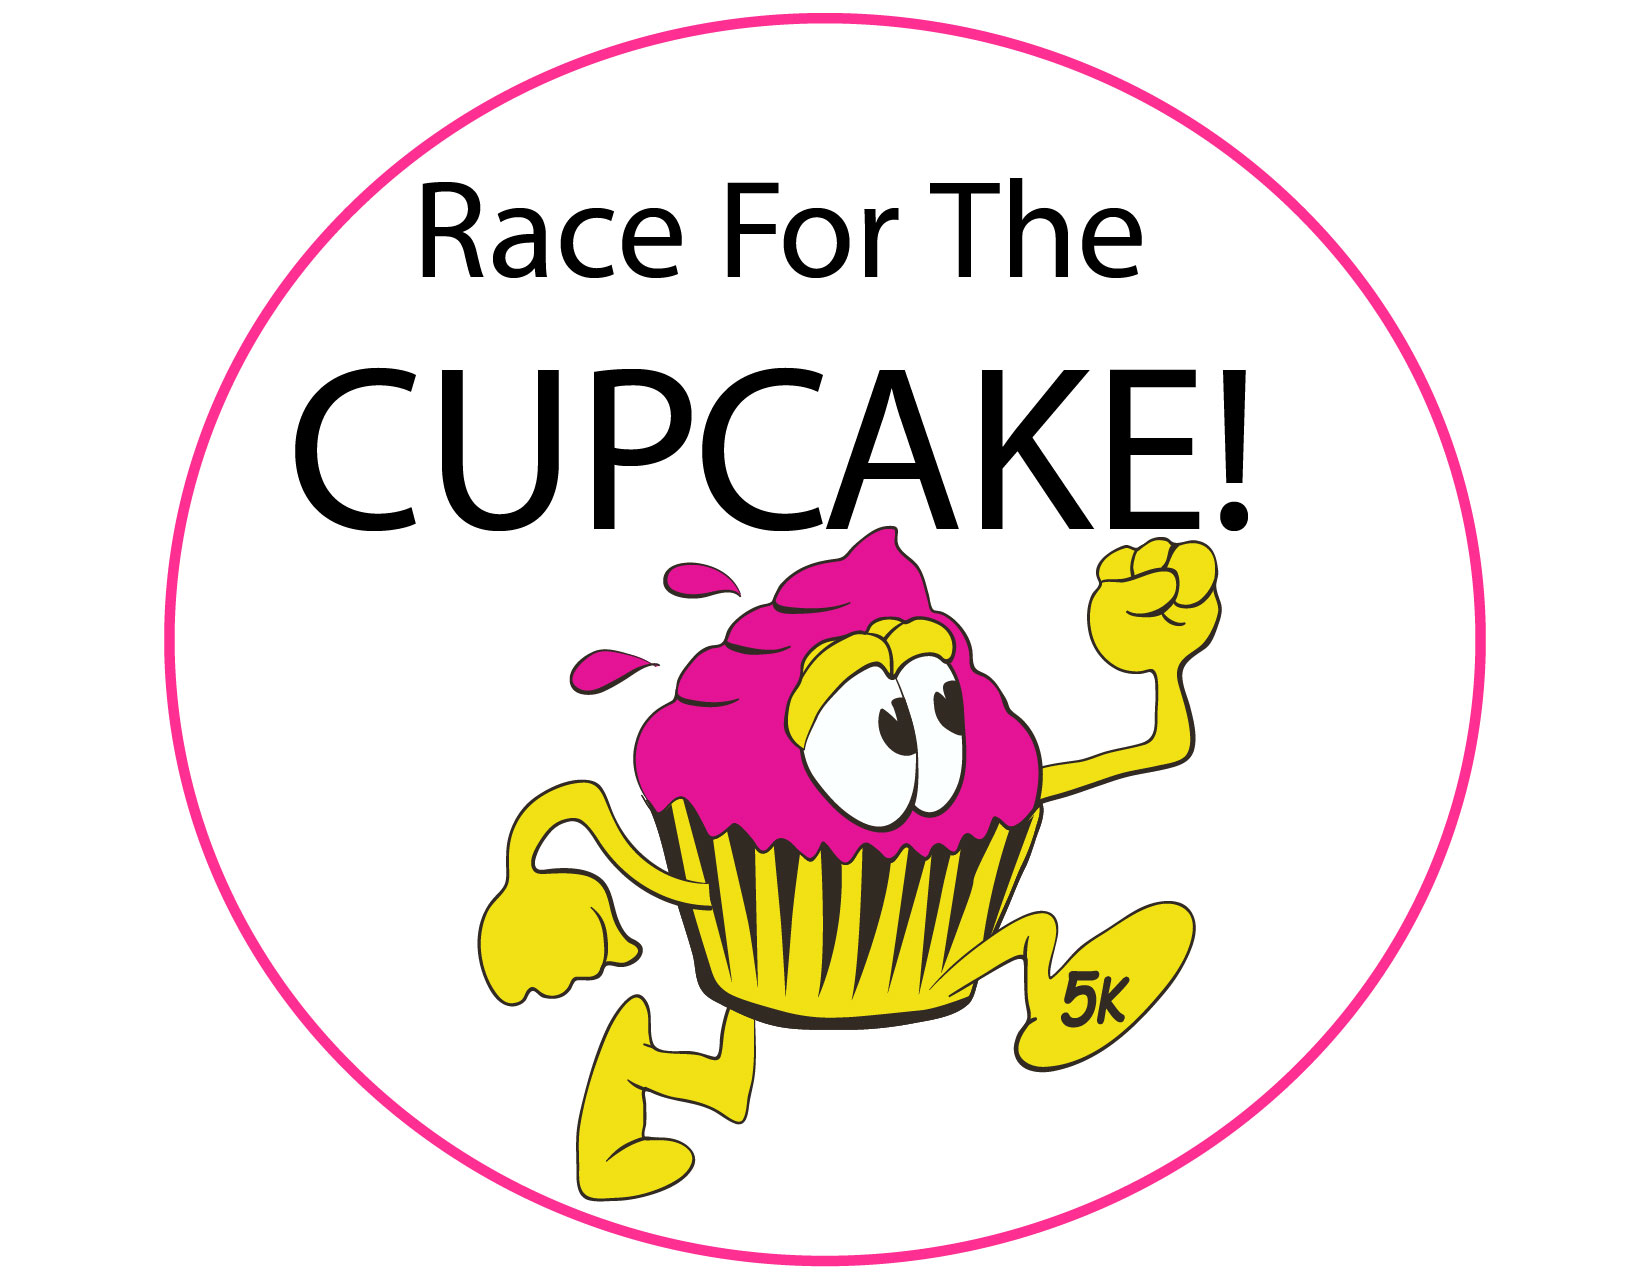 Race for the Cupcake 5k 2019